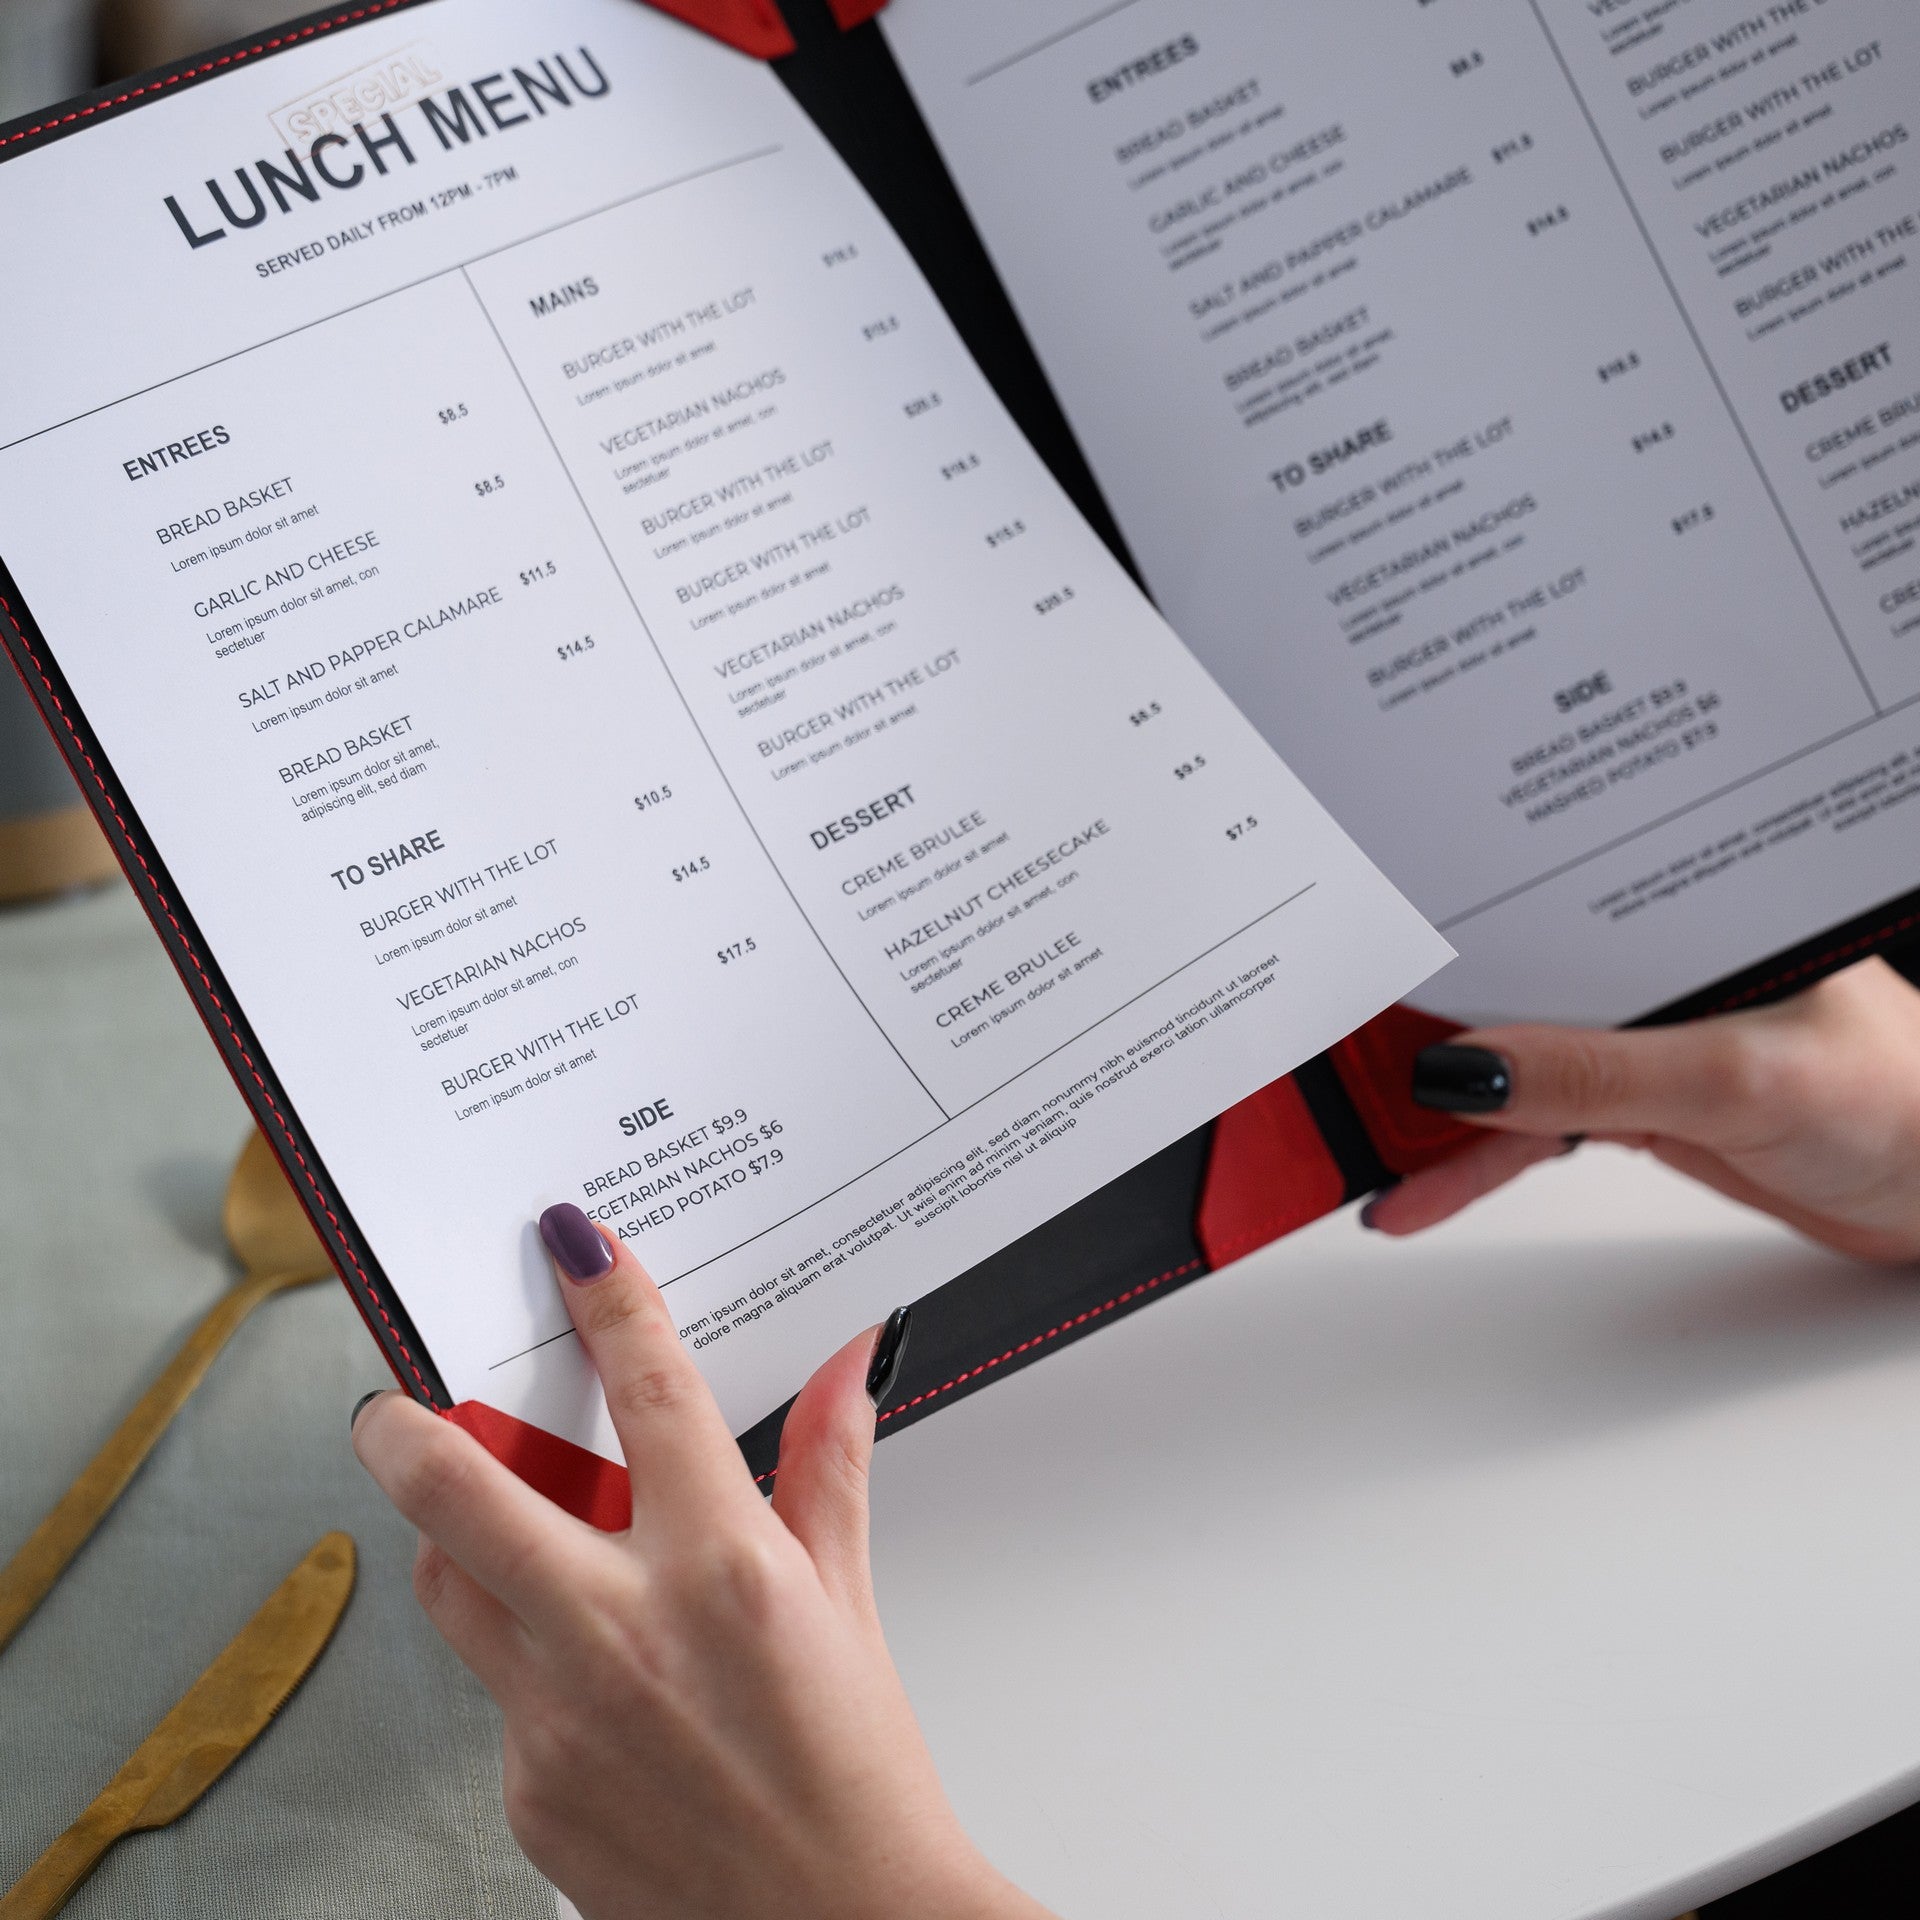 Sleek Menu Cover with Corner Mountings, ensuring a secure and stylish display for your menu items.